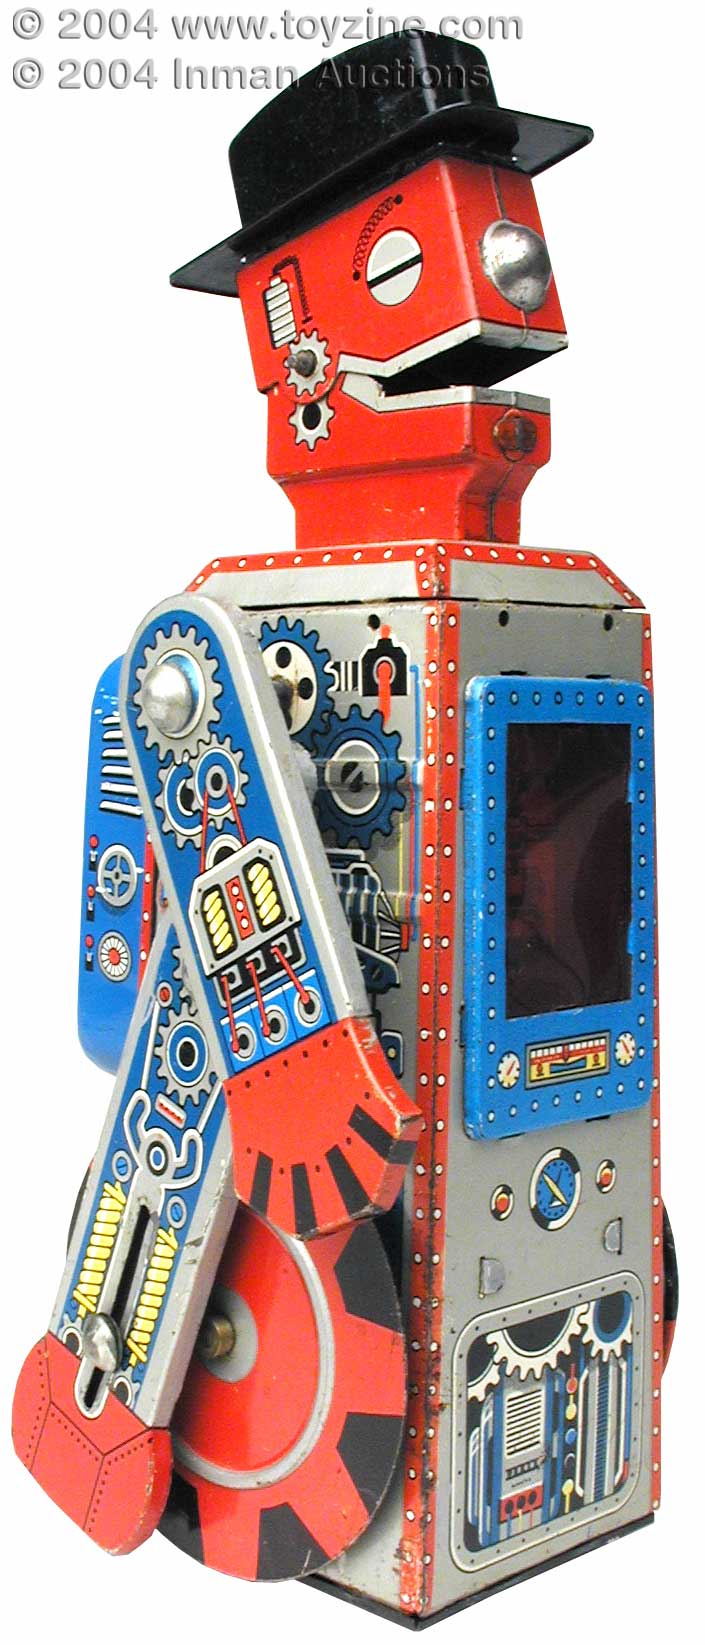 1955 tinplate Japanese robot Mego Man Tin Toy Robot - F.H. Griffith Toy Auction